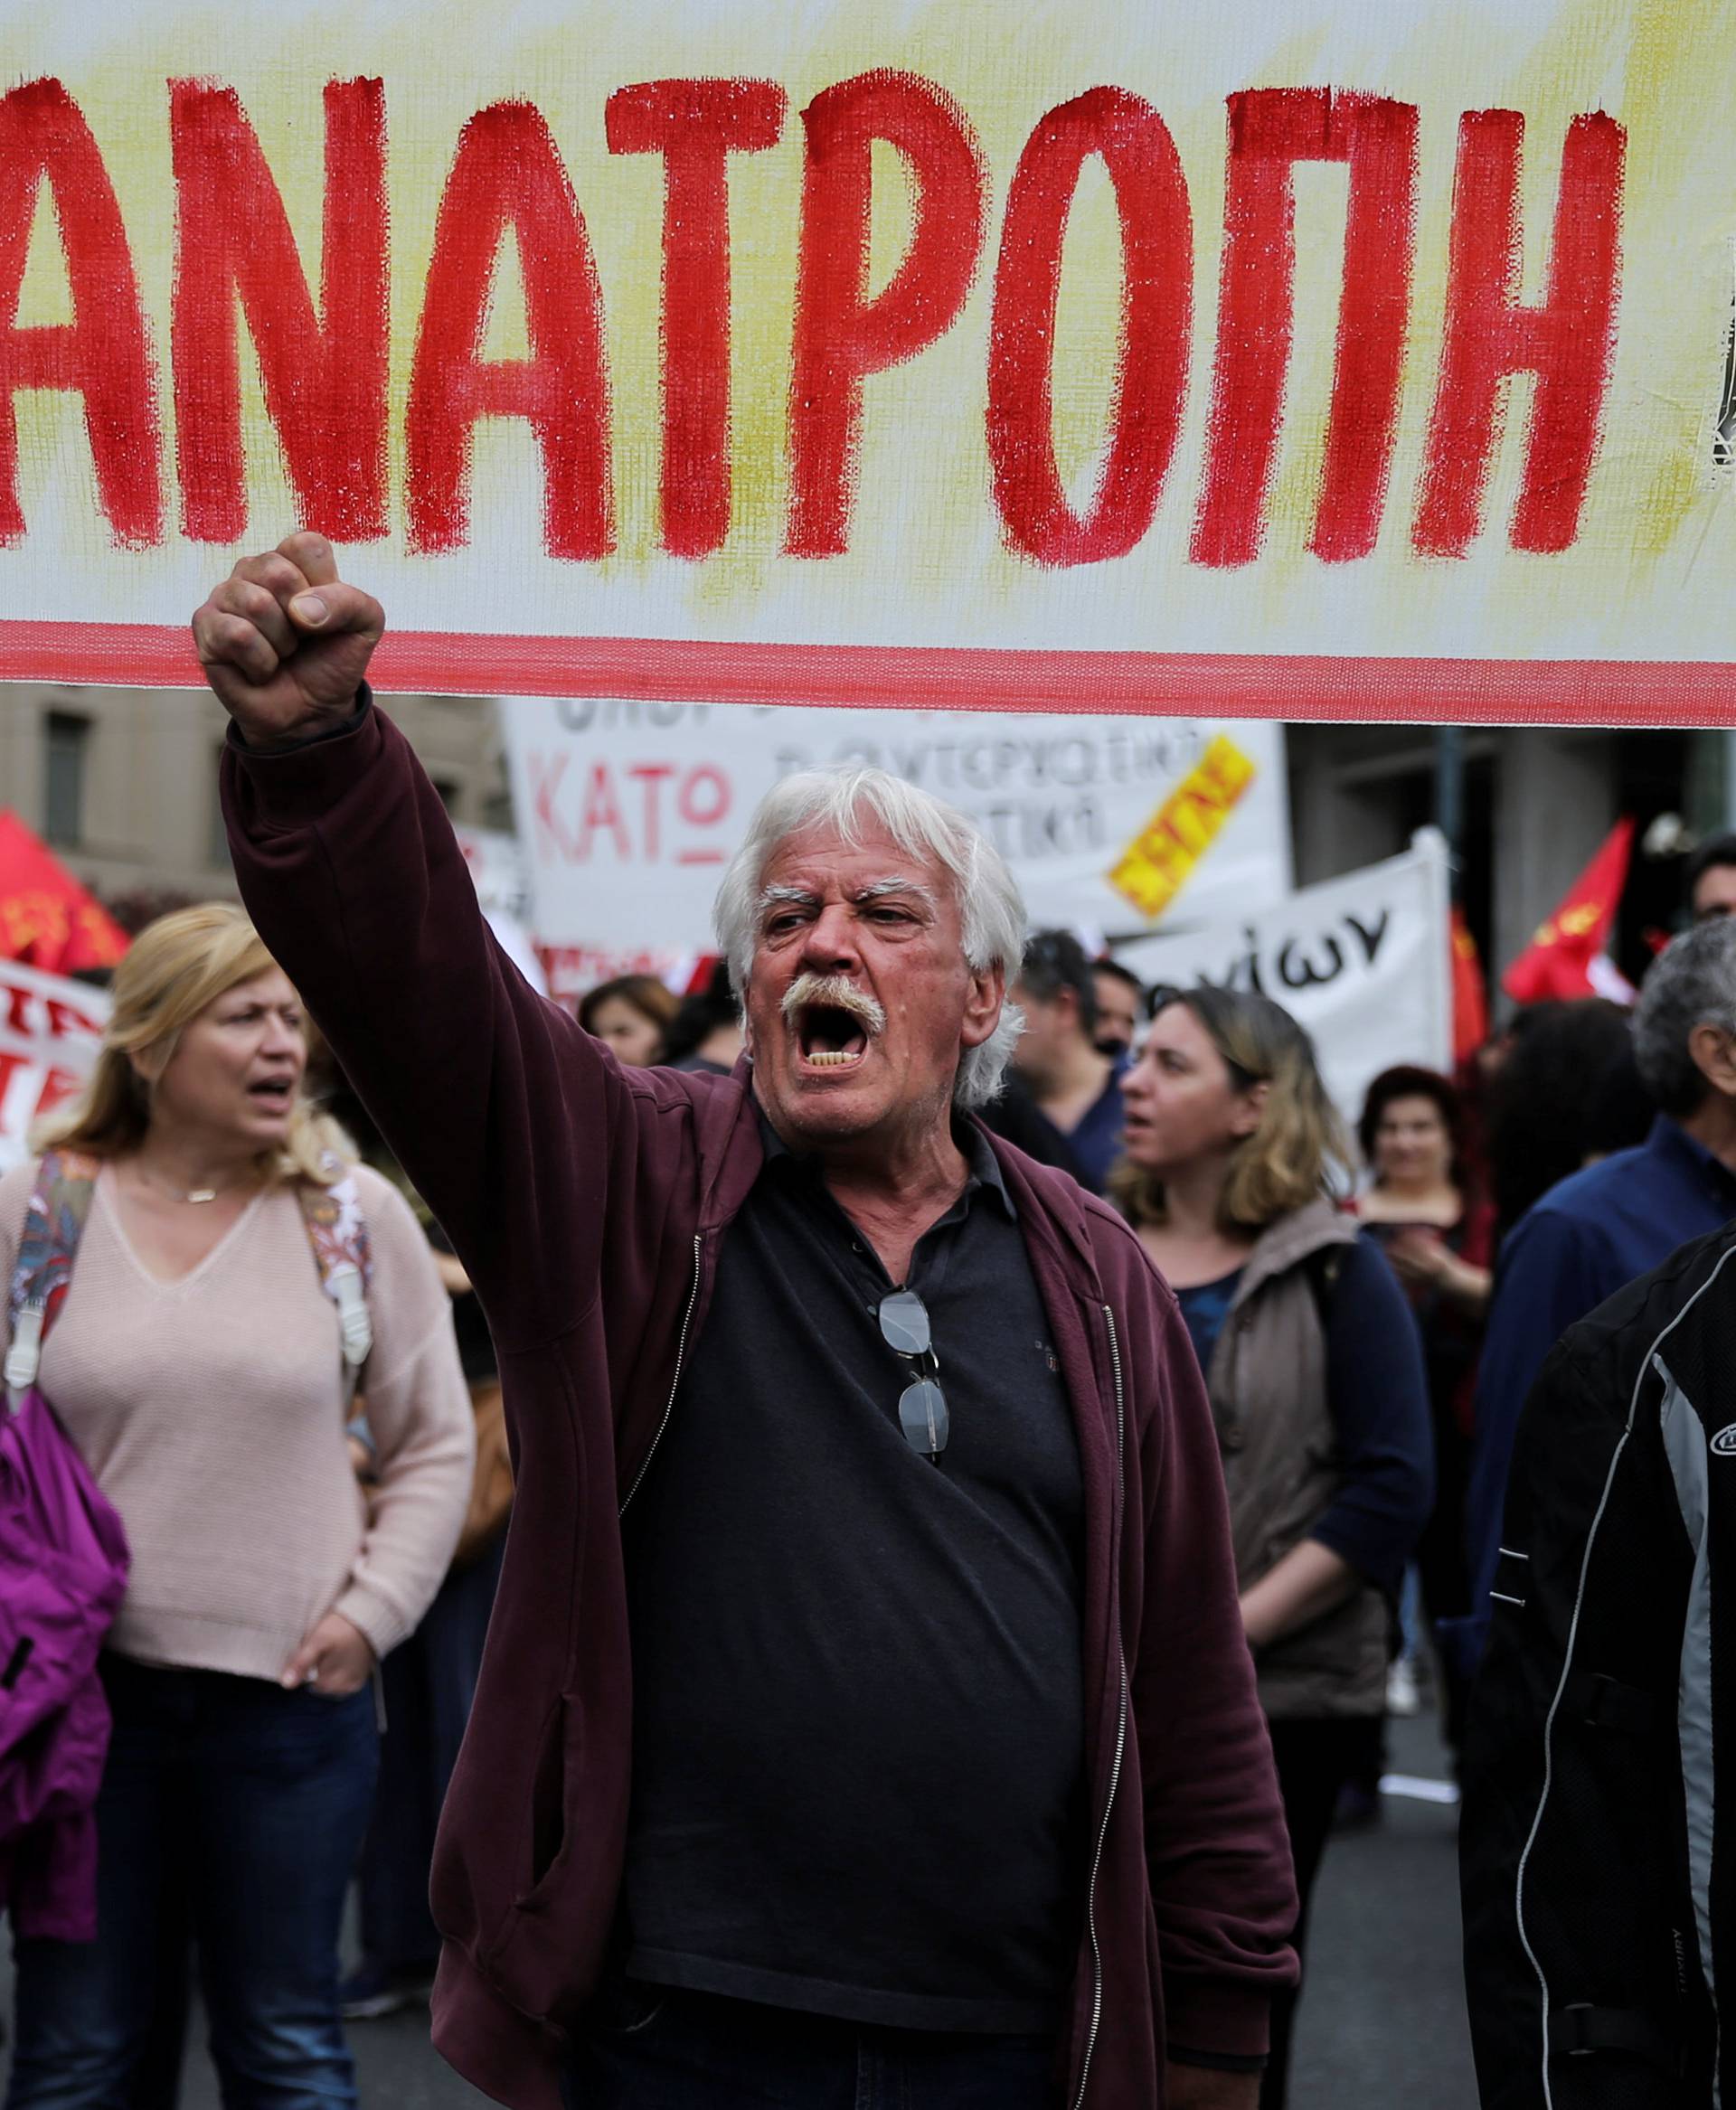 Demonstrators shouts slogans during a demonstration marking a 24-hour general strike against the latest round of austerity in Athens